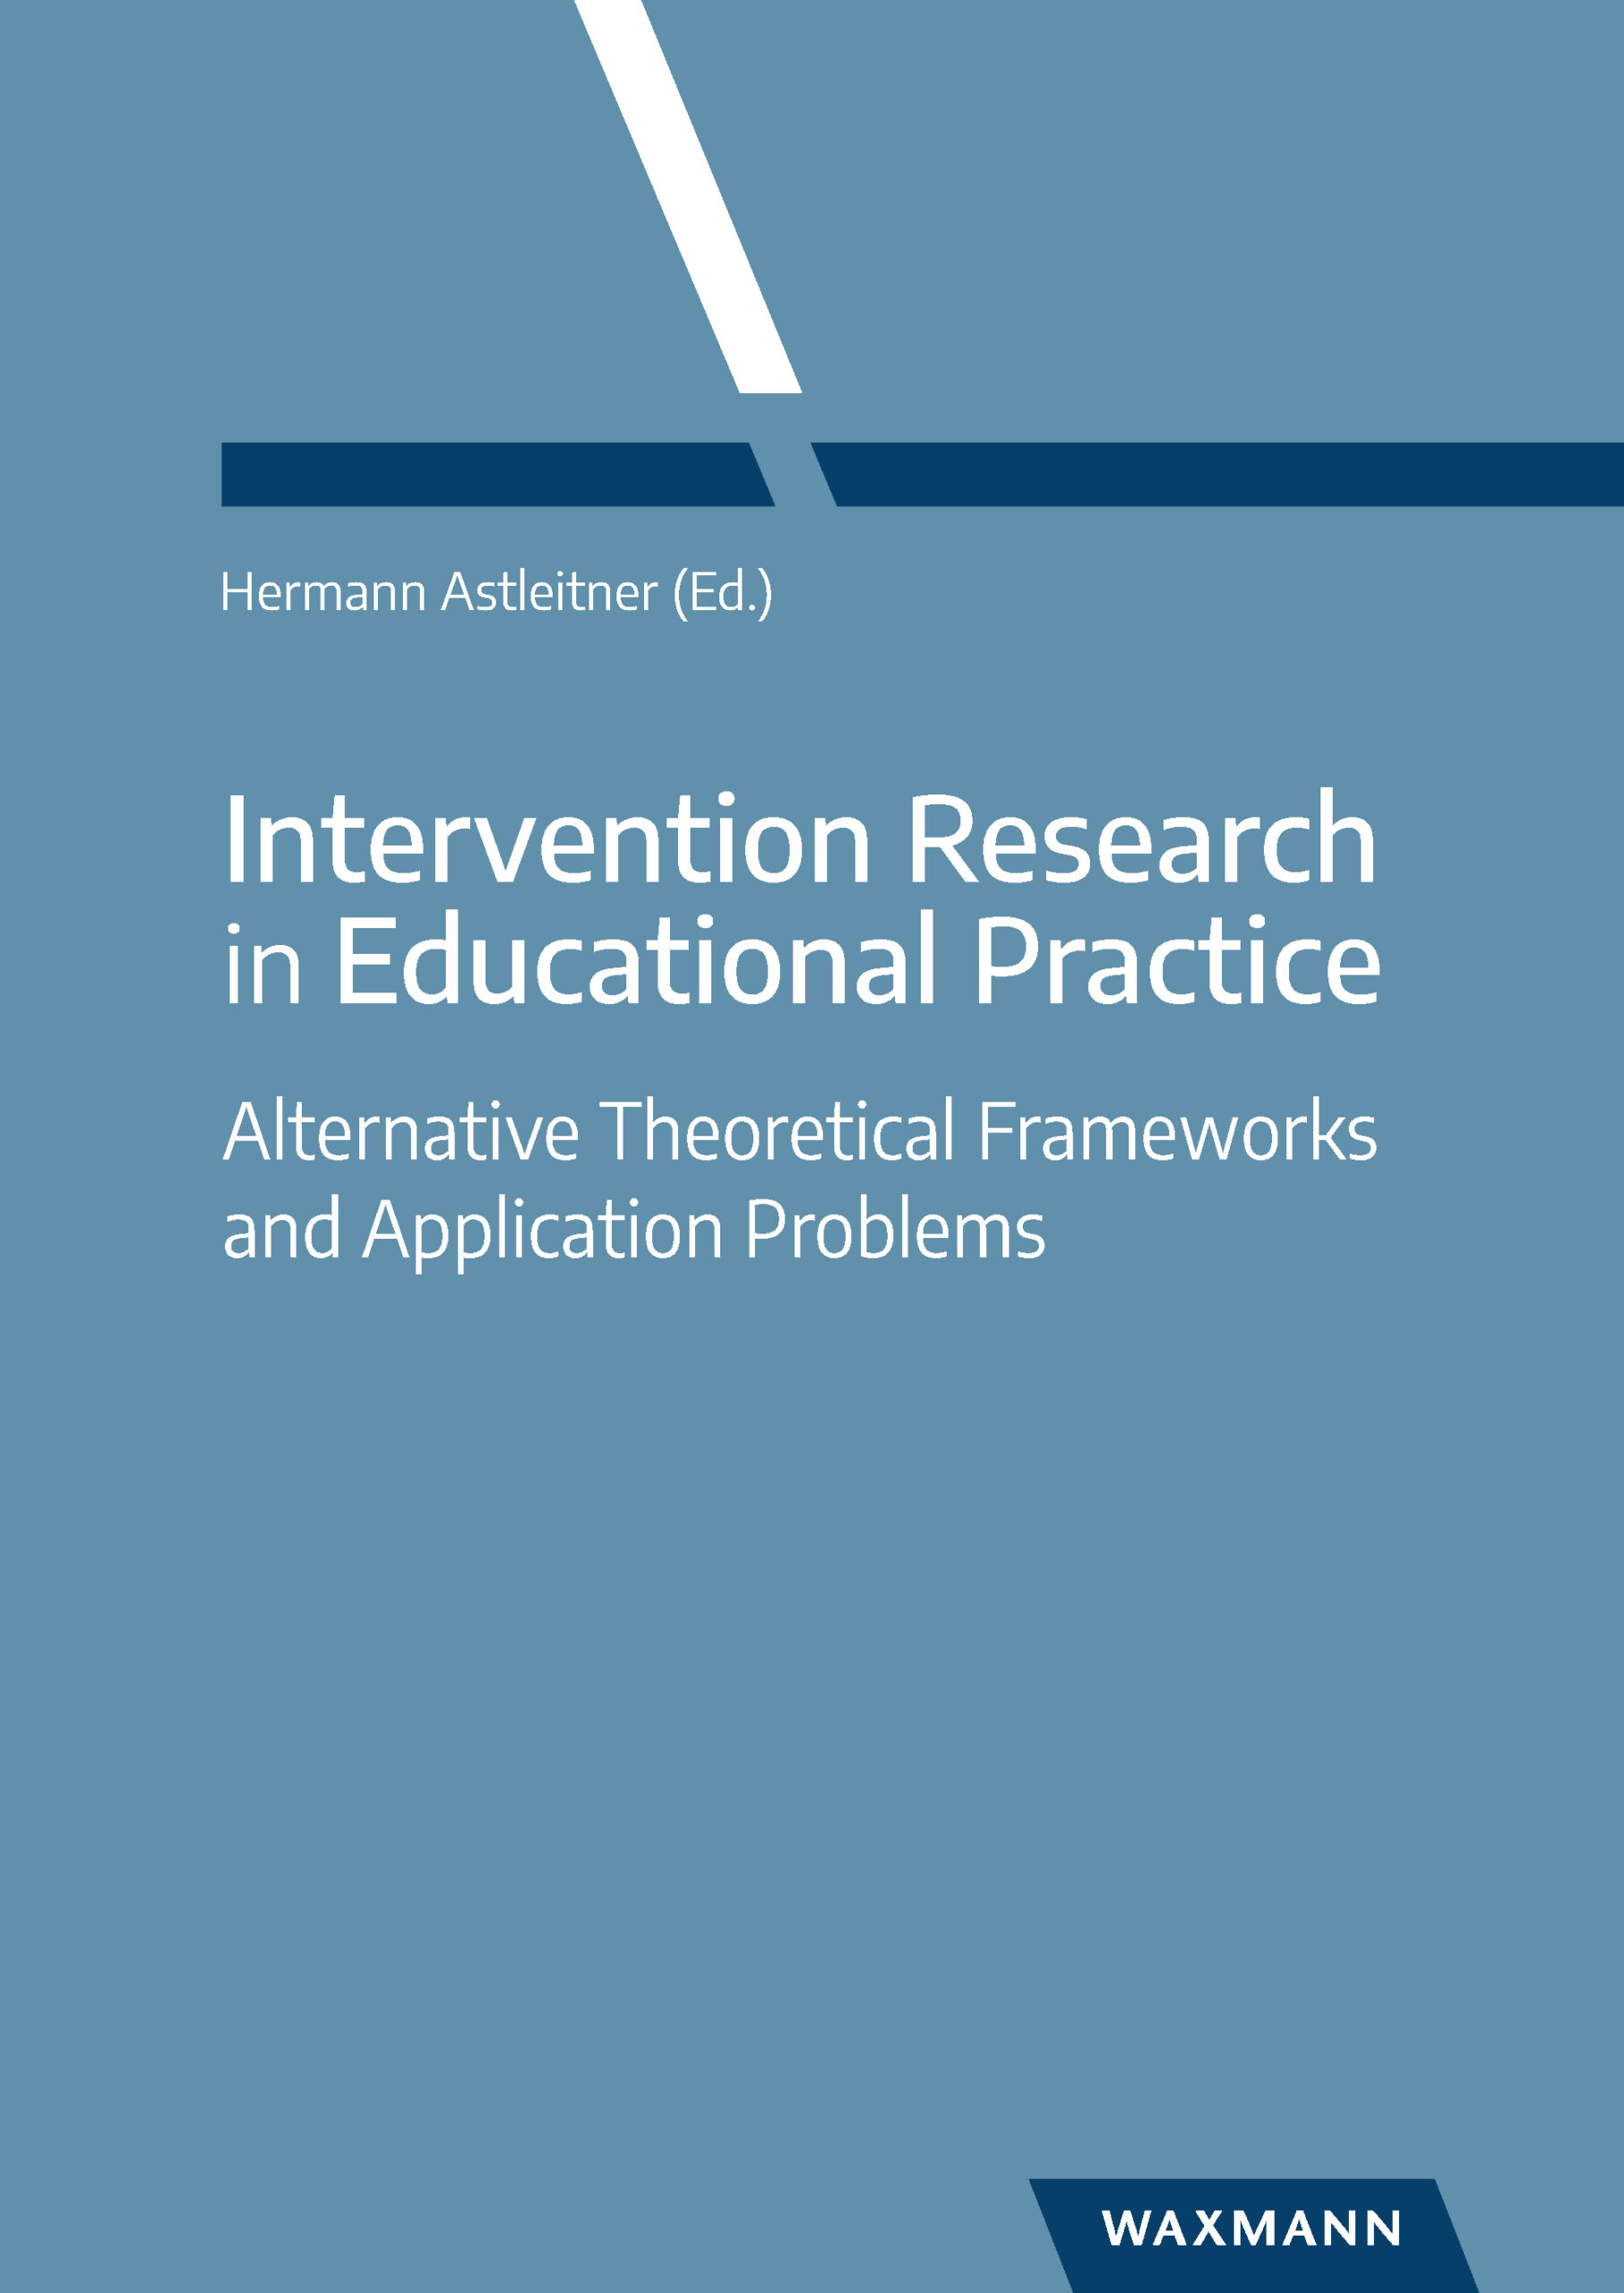 Intervention Research in Educational Practice. Alternative Theoretical Frameworks and Application Problems